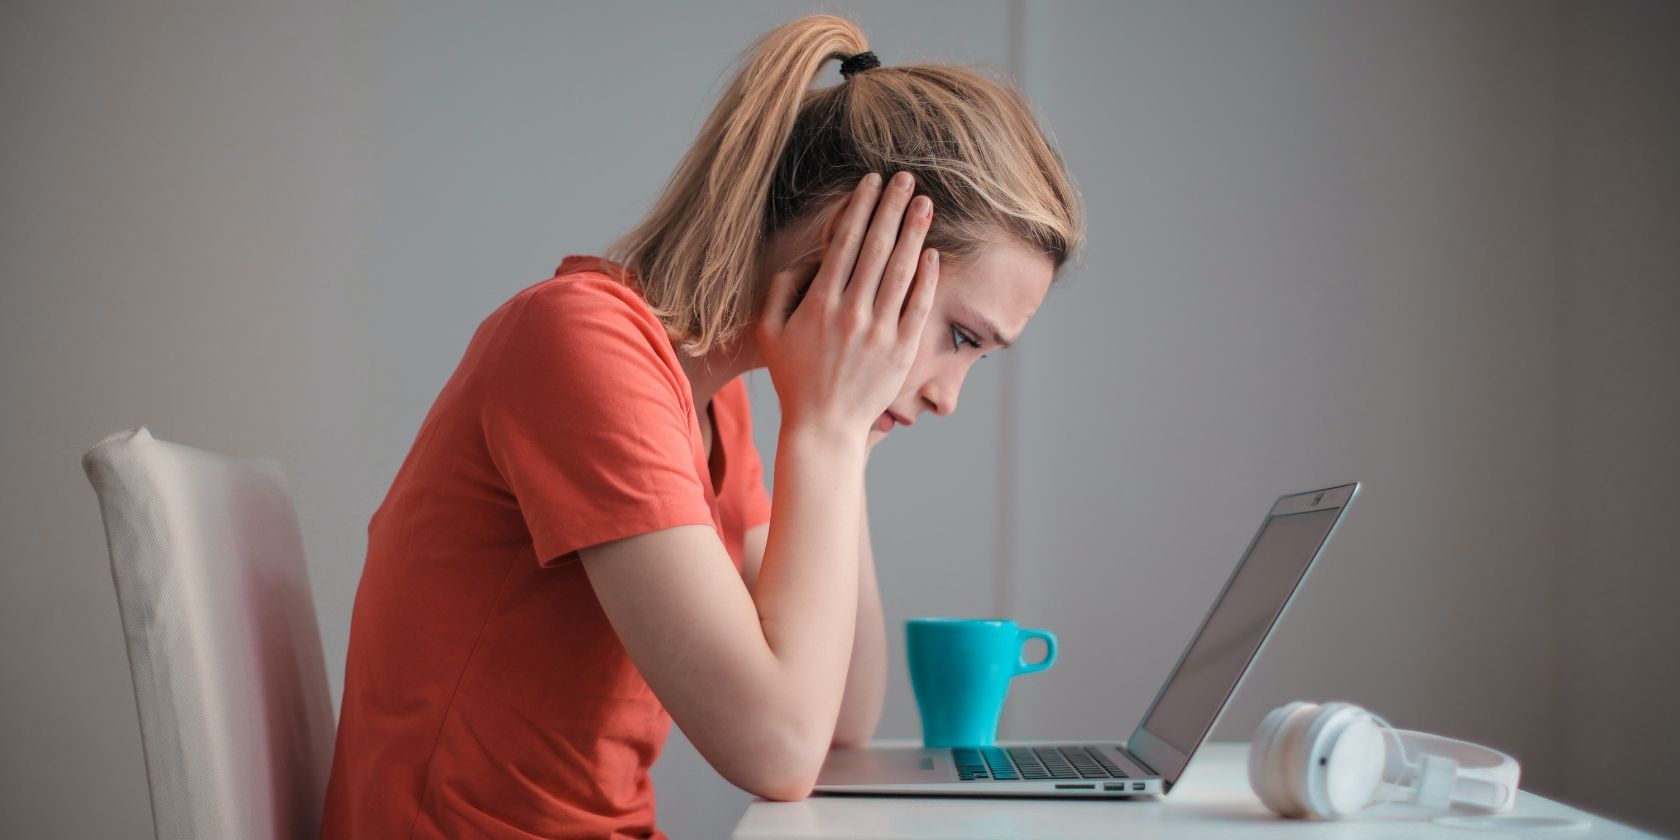 Blond woman with ponytail and orange shirt looking at her laptop with both hands on the sides of her face looking disappointed